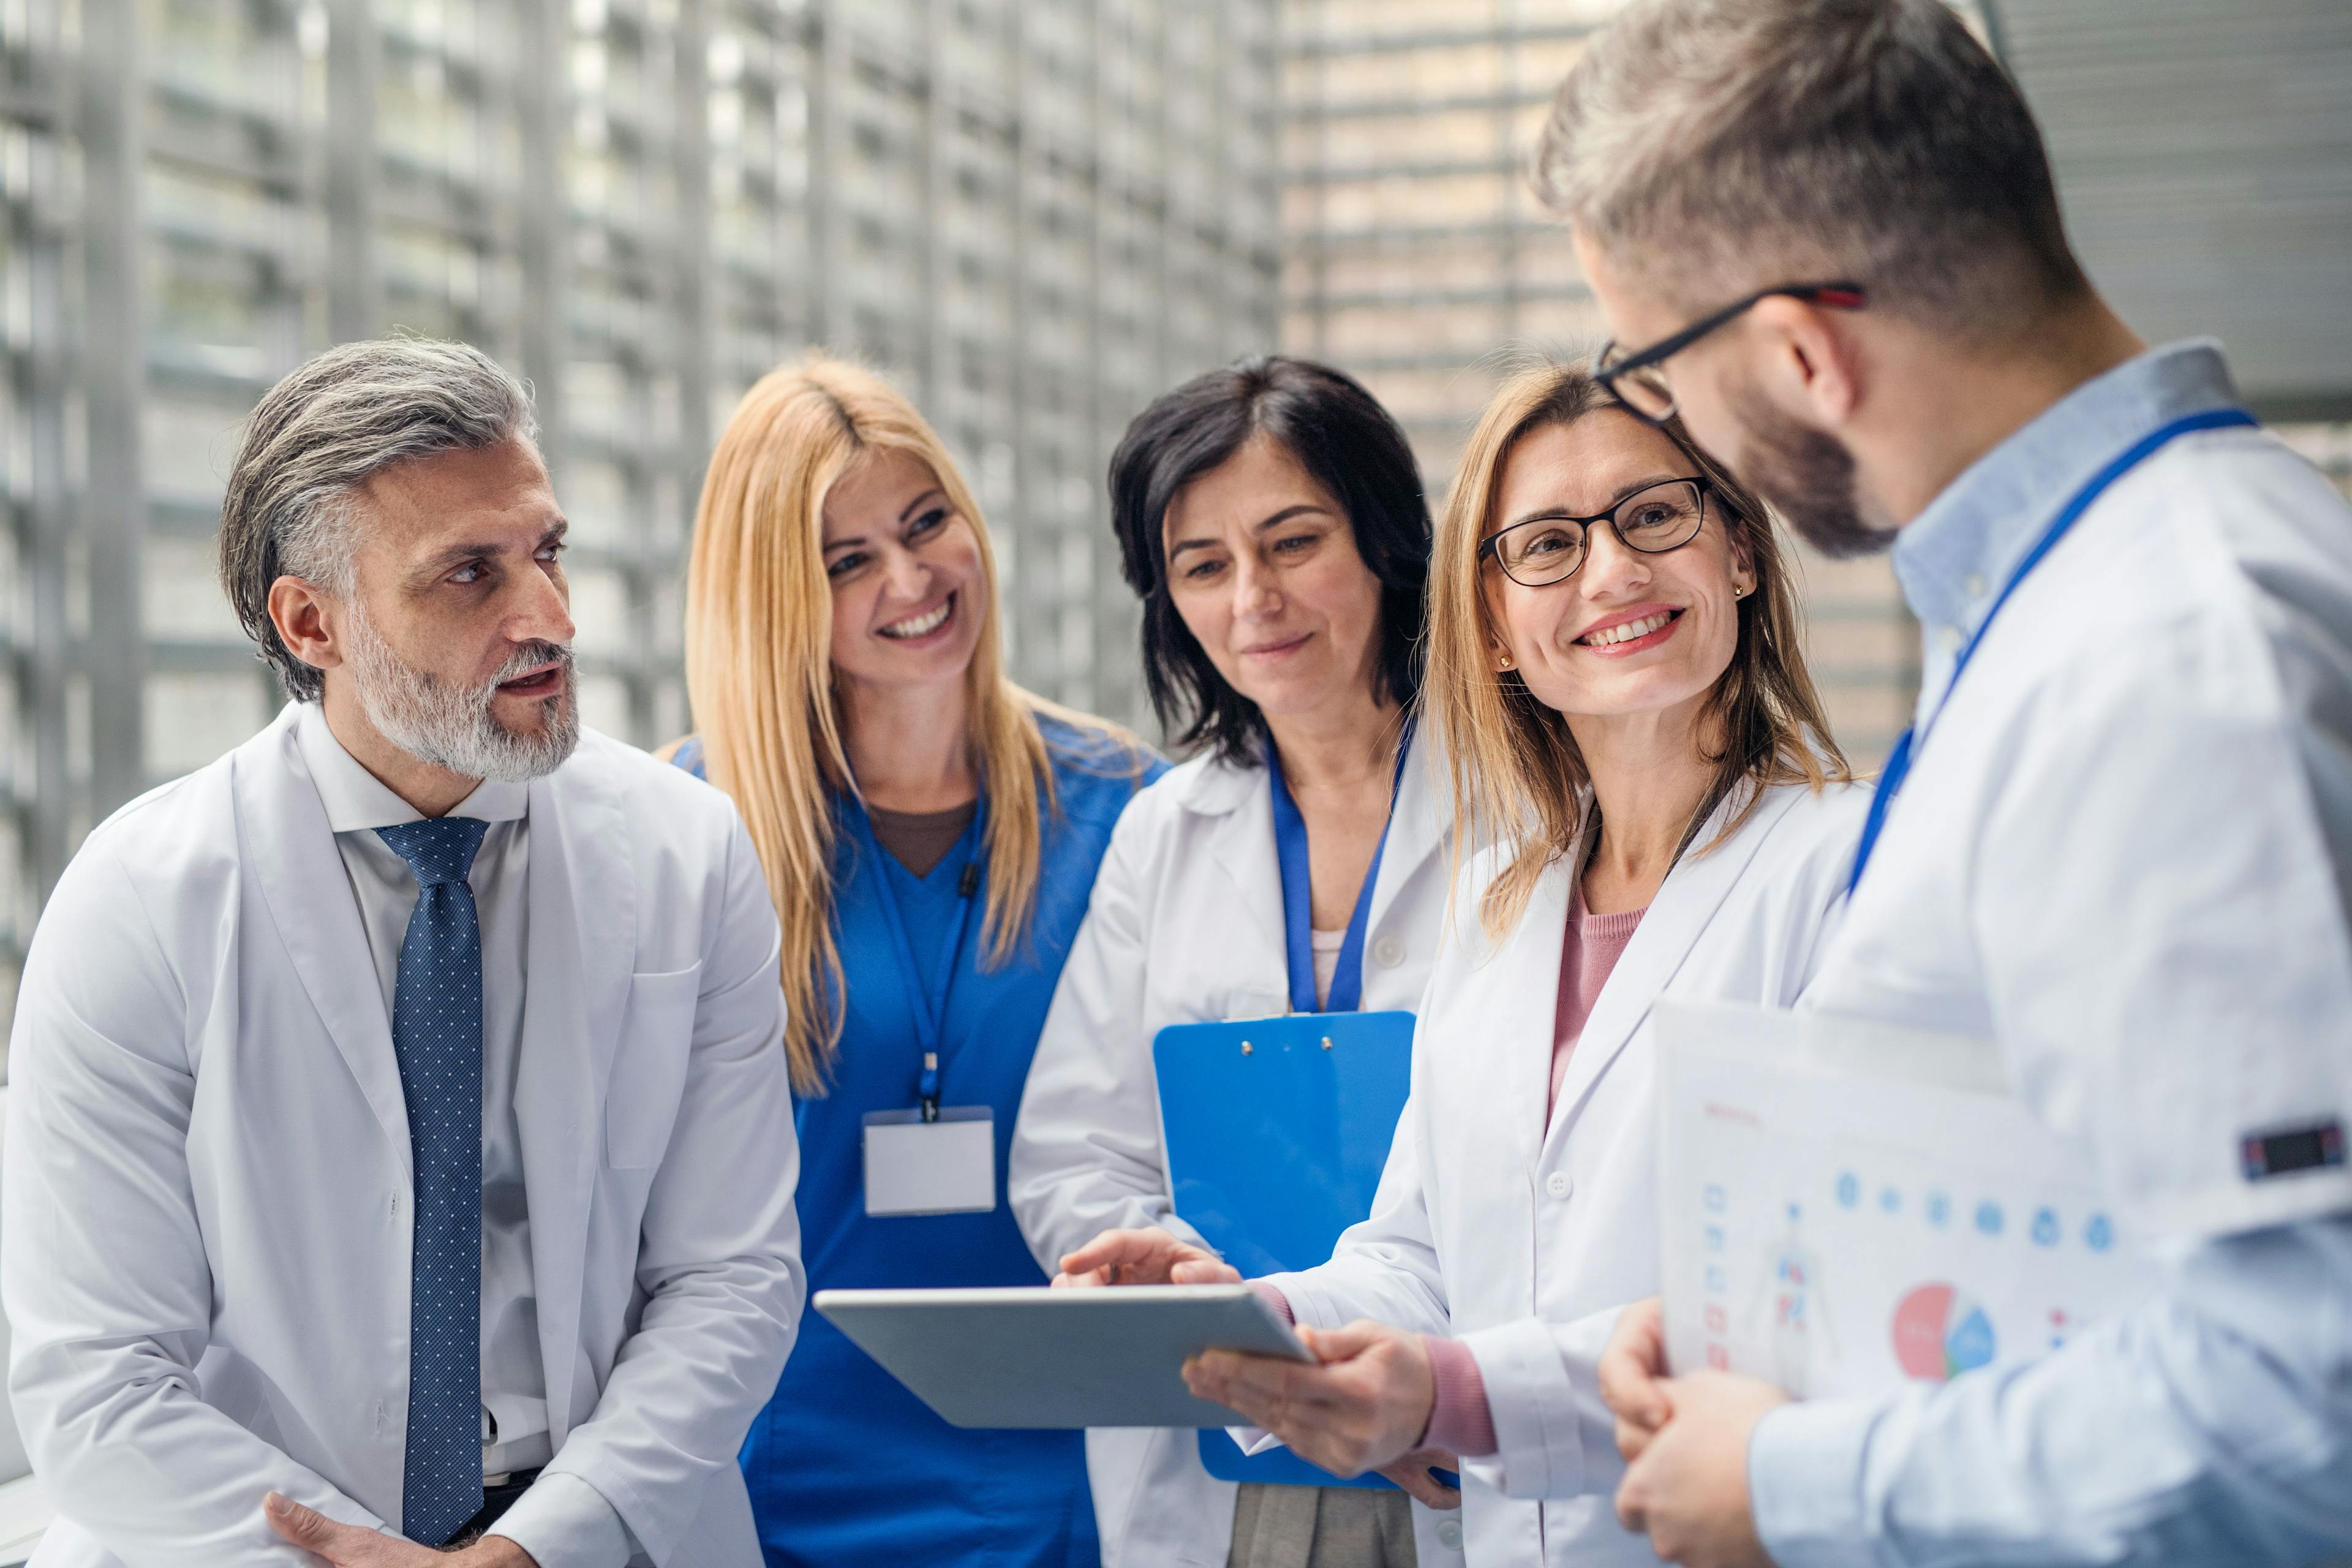 Here's how a refocus on relationships, connections, and dialogue can improve the overall patient experience.